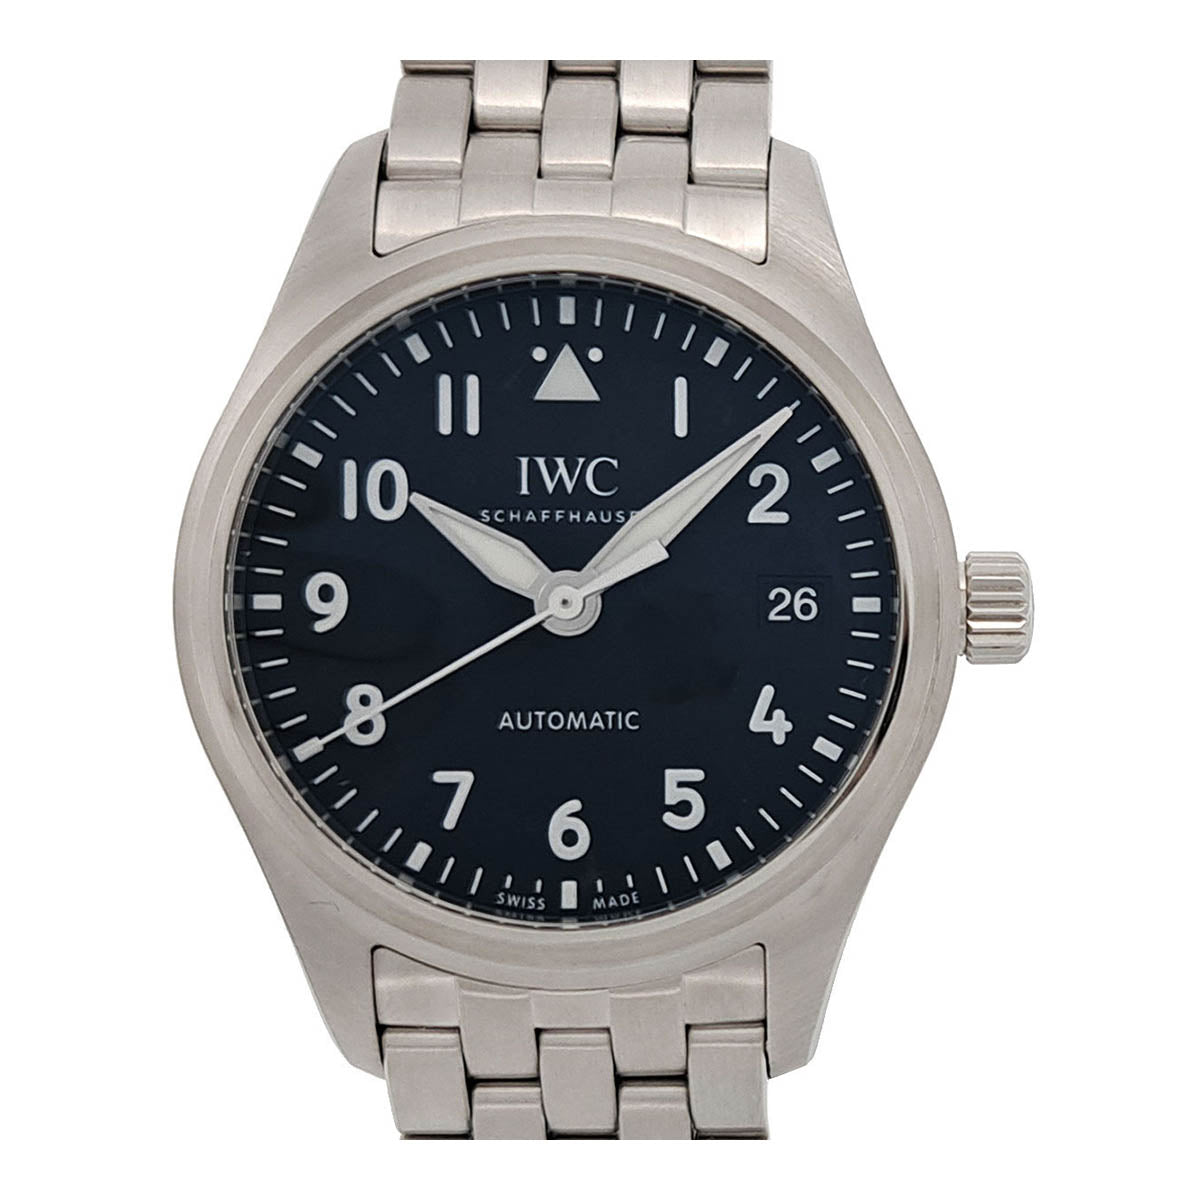 IWC Pilot's Watch Automatic 36 Stainless Steel Men's/Boys Watch IW324010